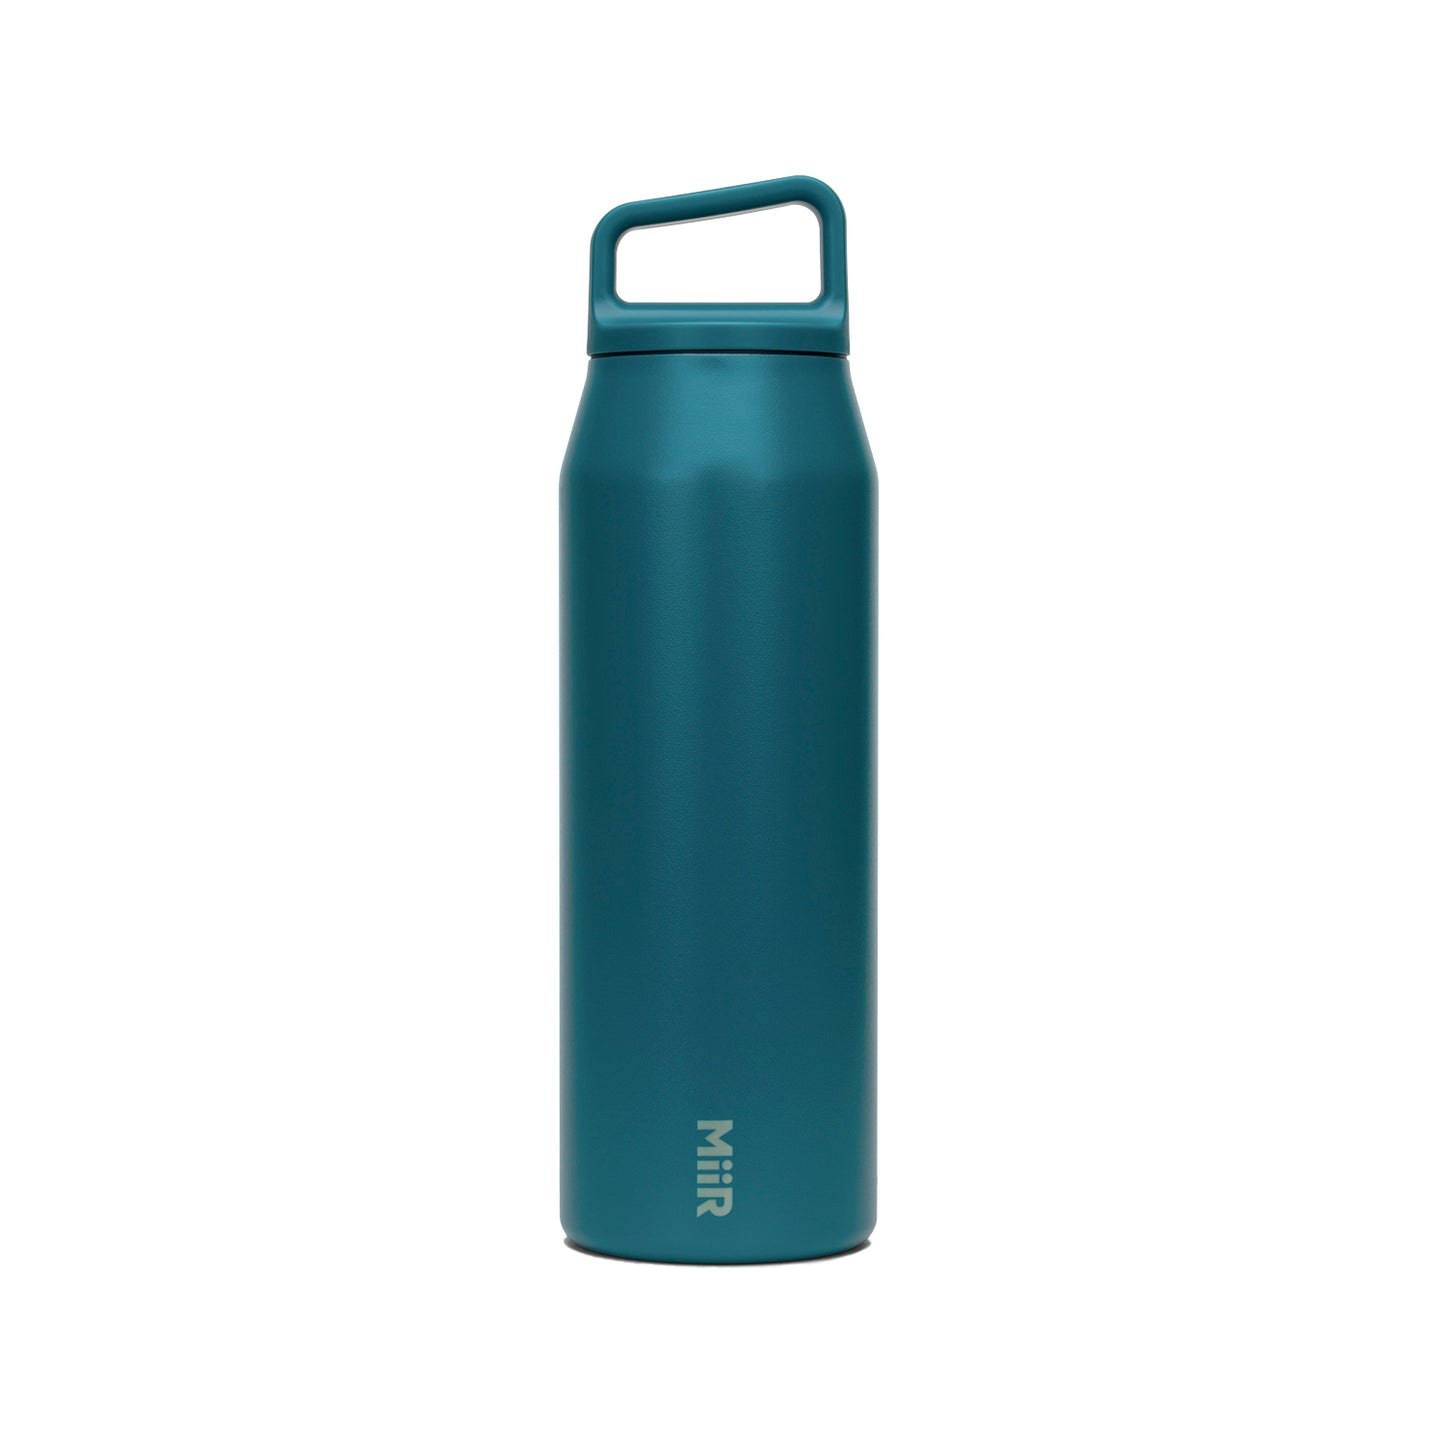 Here & Now Supply Co. Growler for Beer & Water, 64 oz Double Wall Vacuum  Insulated Stainless Steel Thermos Bottle, Jug for Hot & Cold Beverages